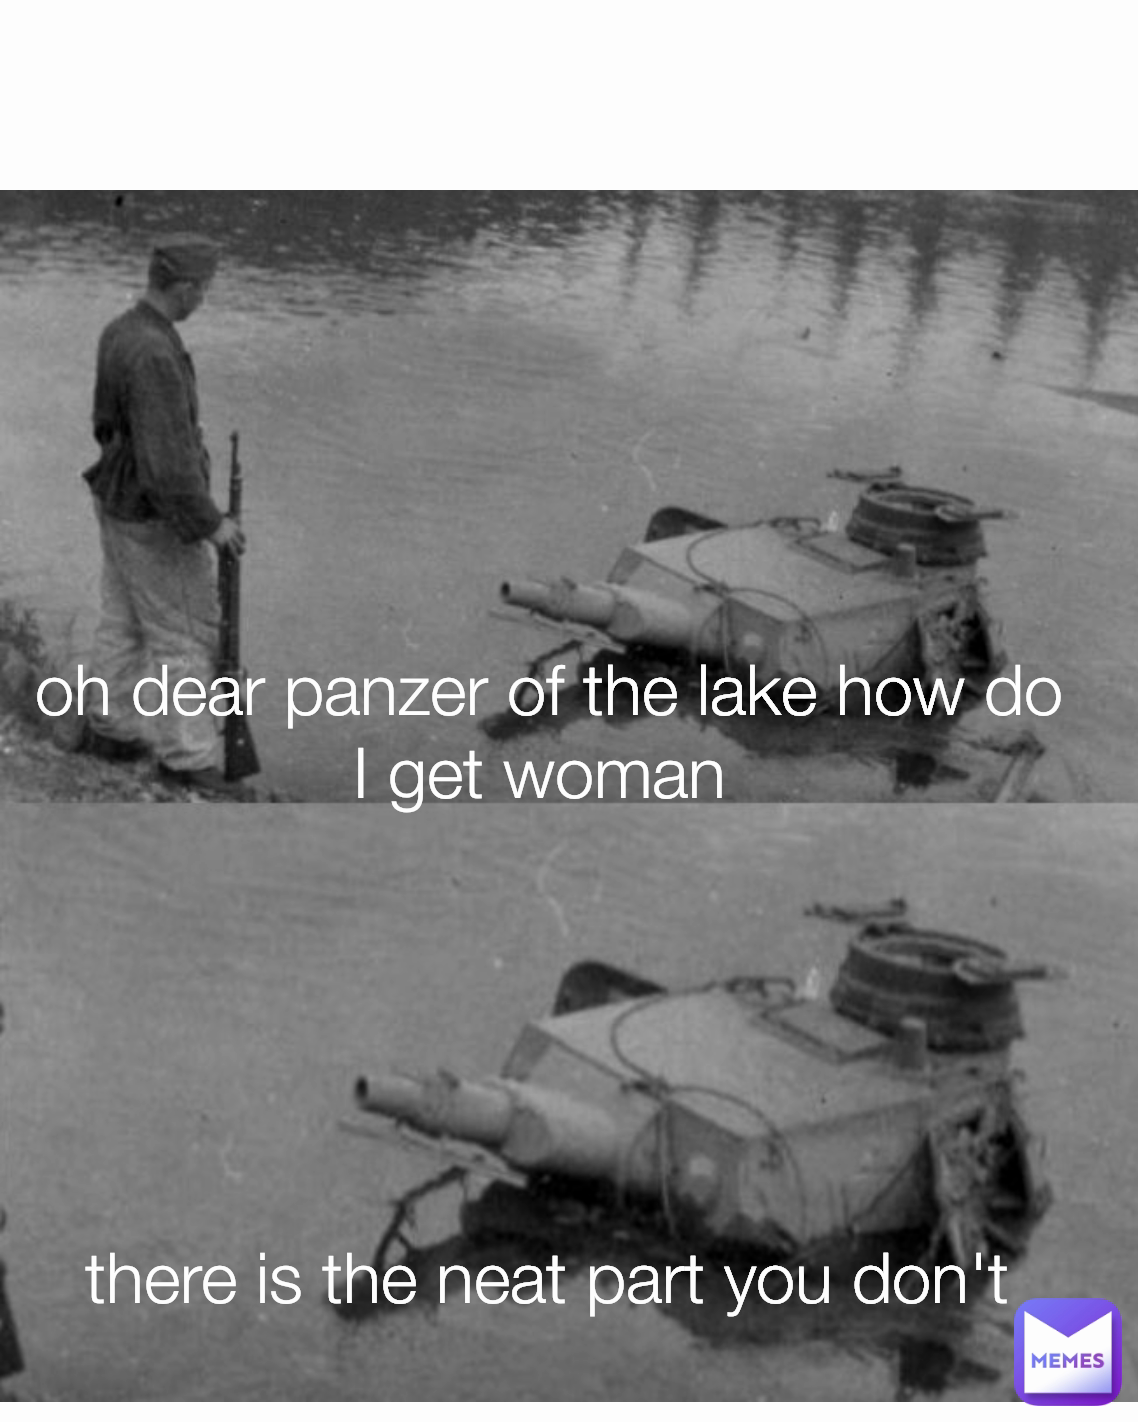 there-is-the-neat-part-you-don-t-oh-dear-panzer-of-the-lake-how-do-i